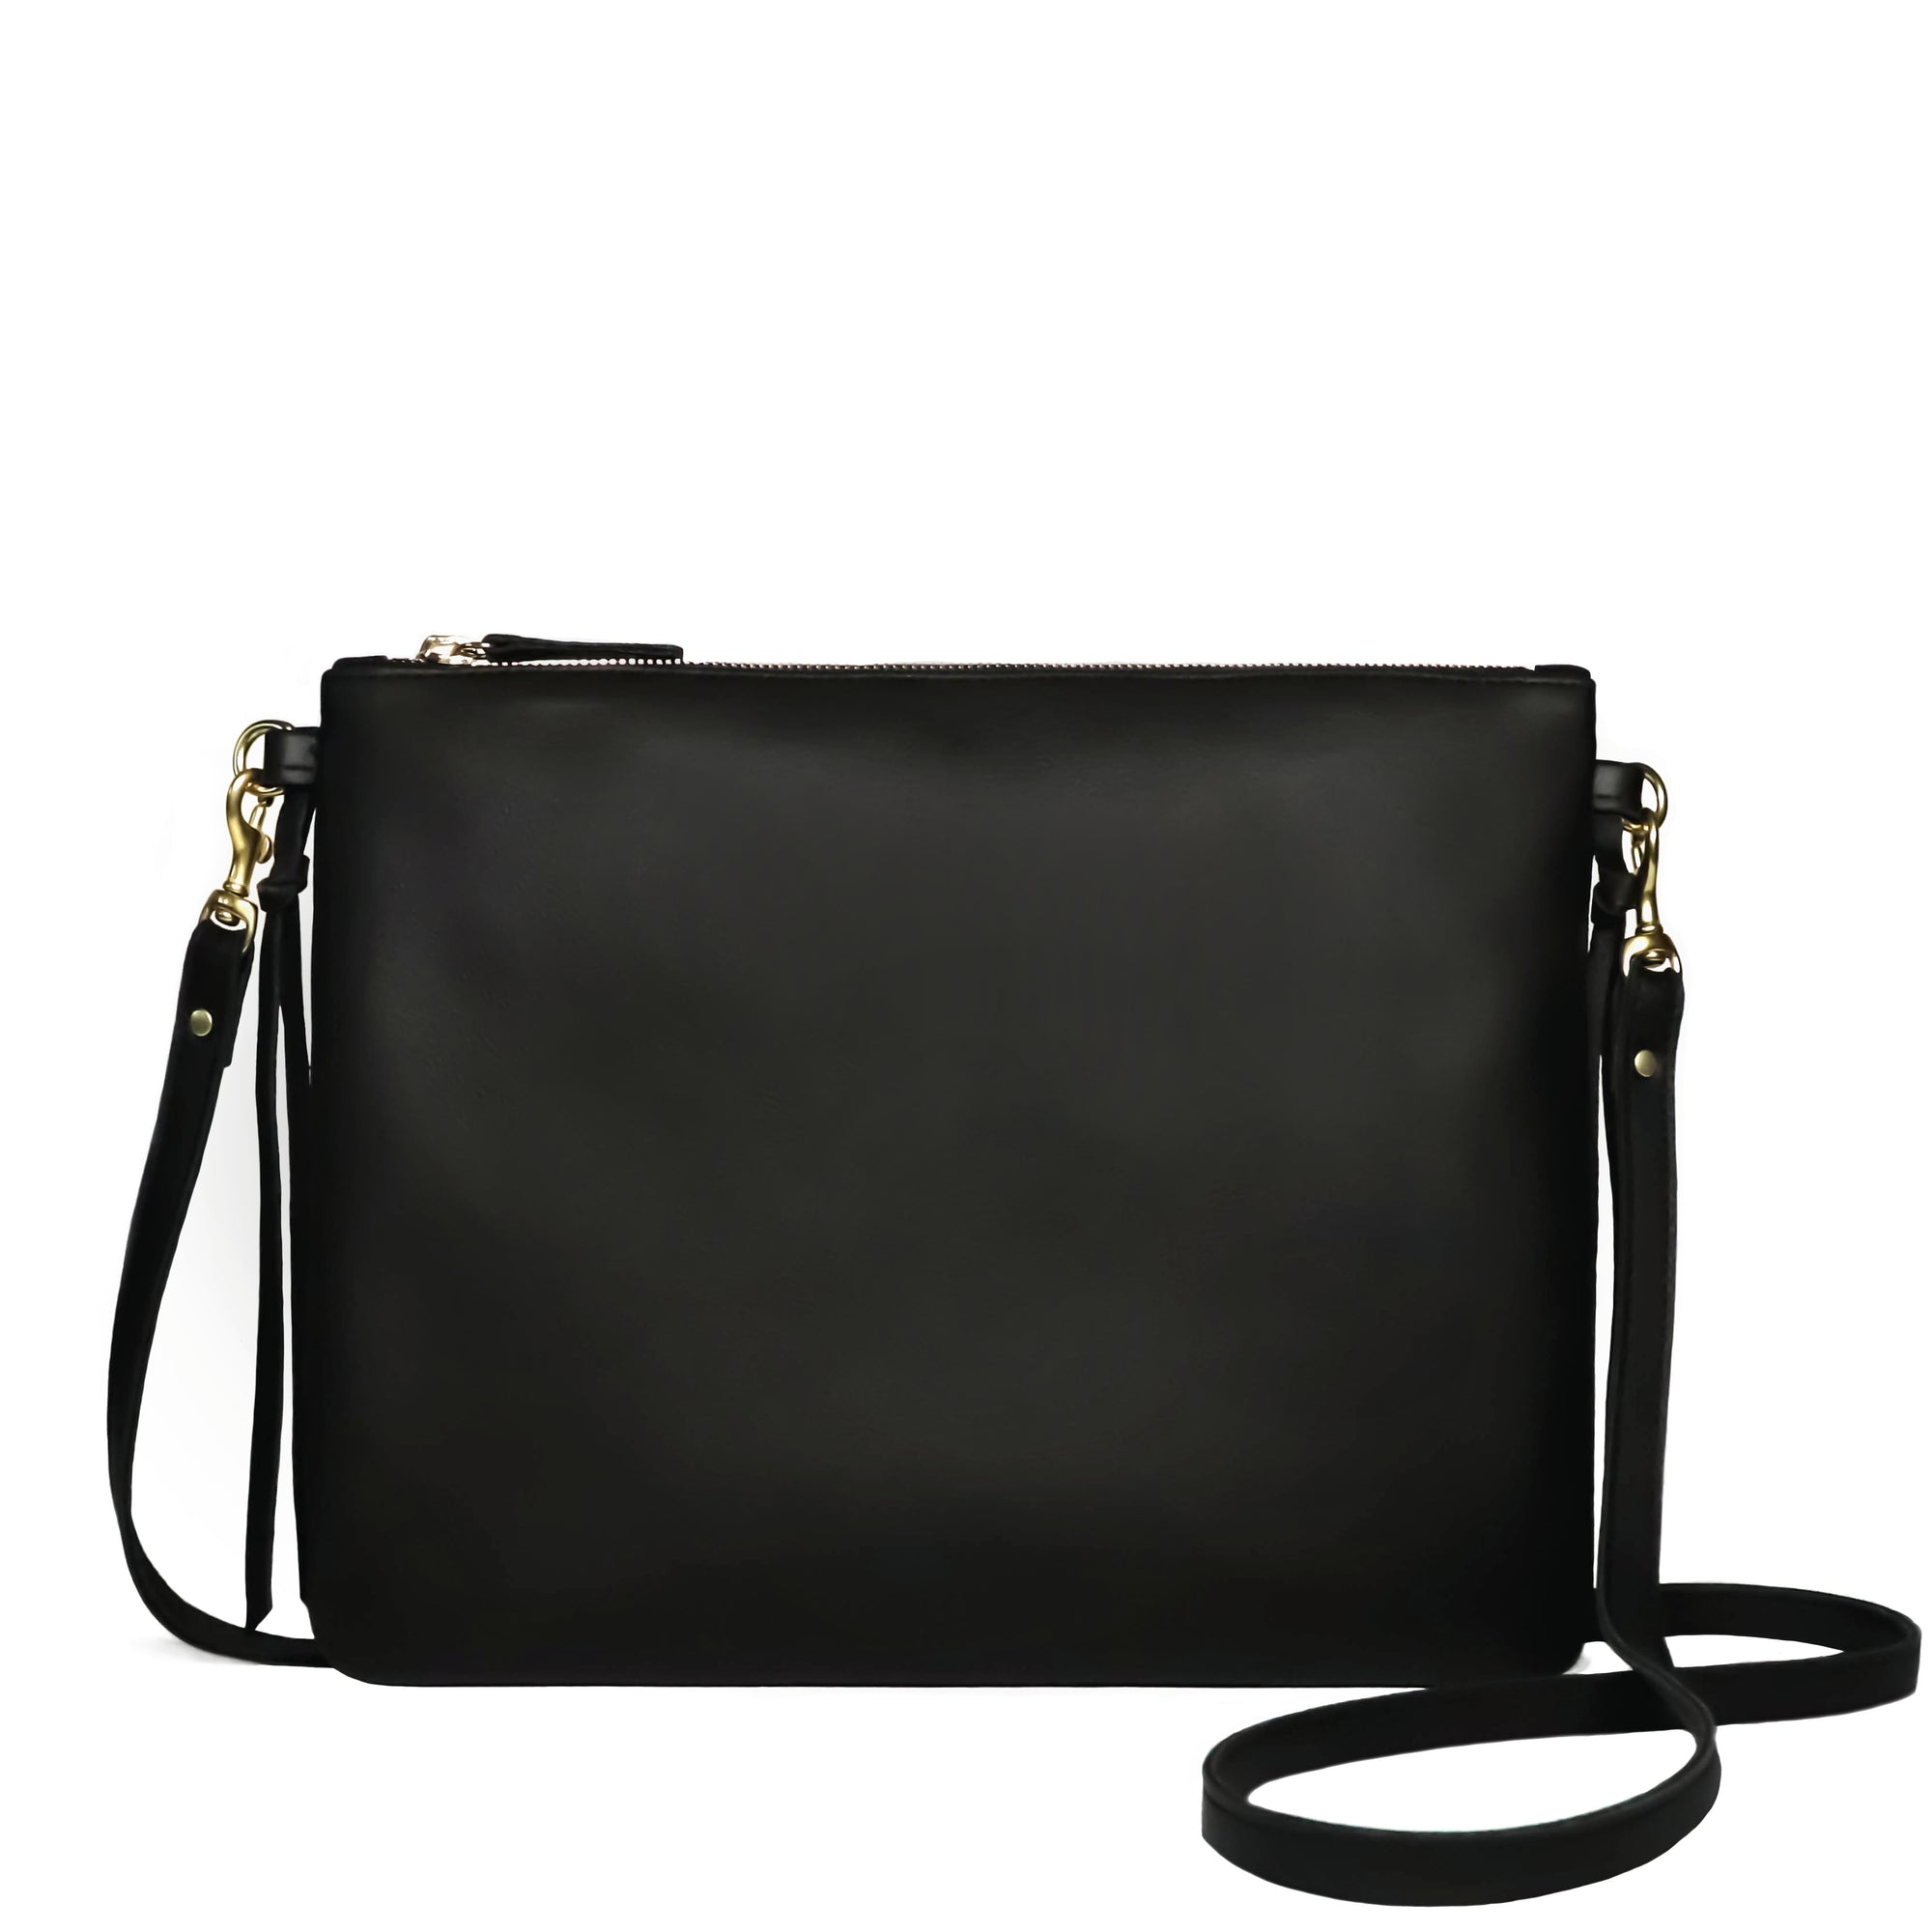 North Beach Crossbody - Women's leather cross body style purse in black leather.  Made in U.S.A. by Jana Kay.